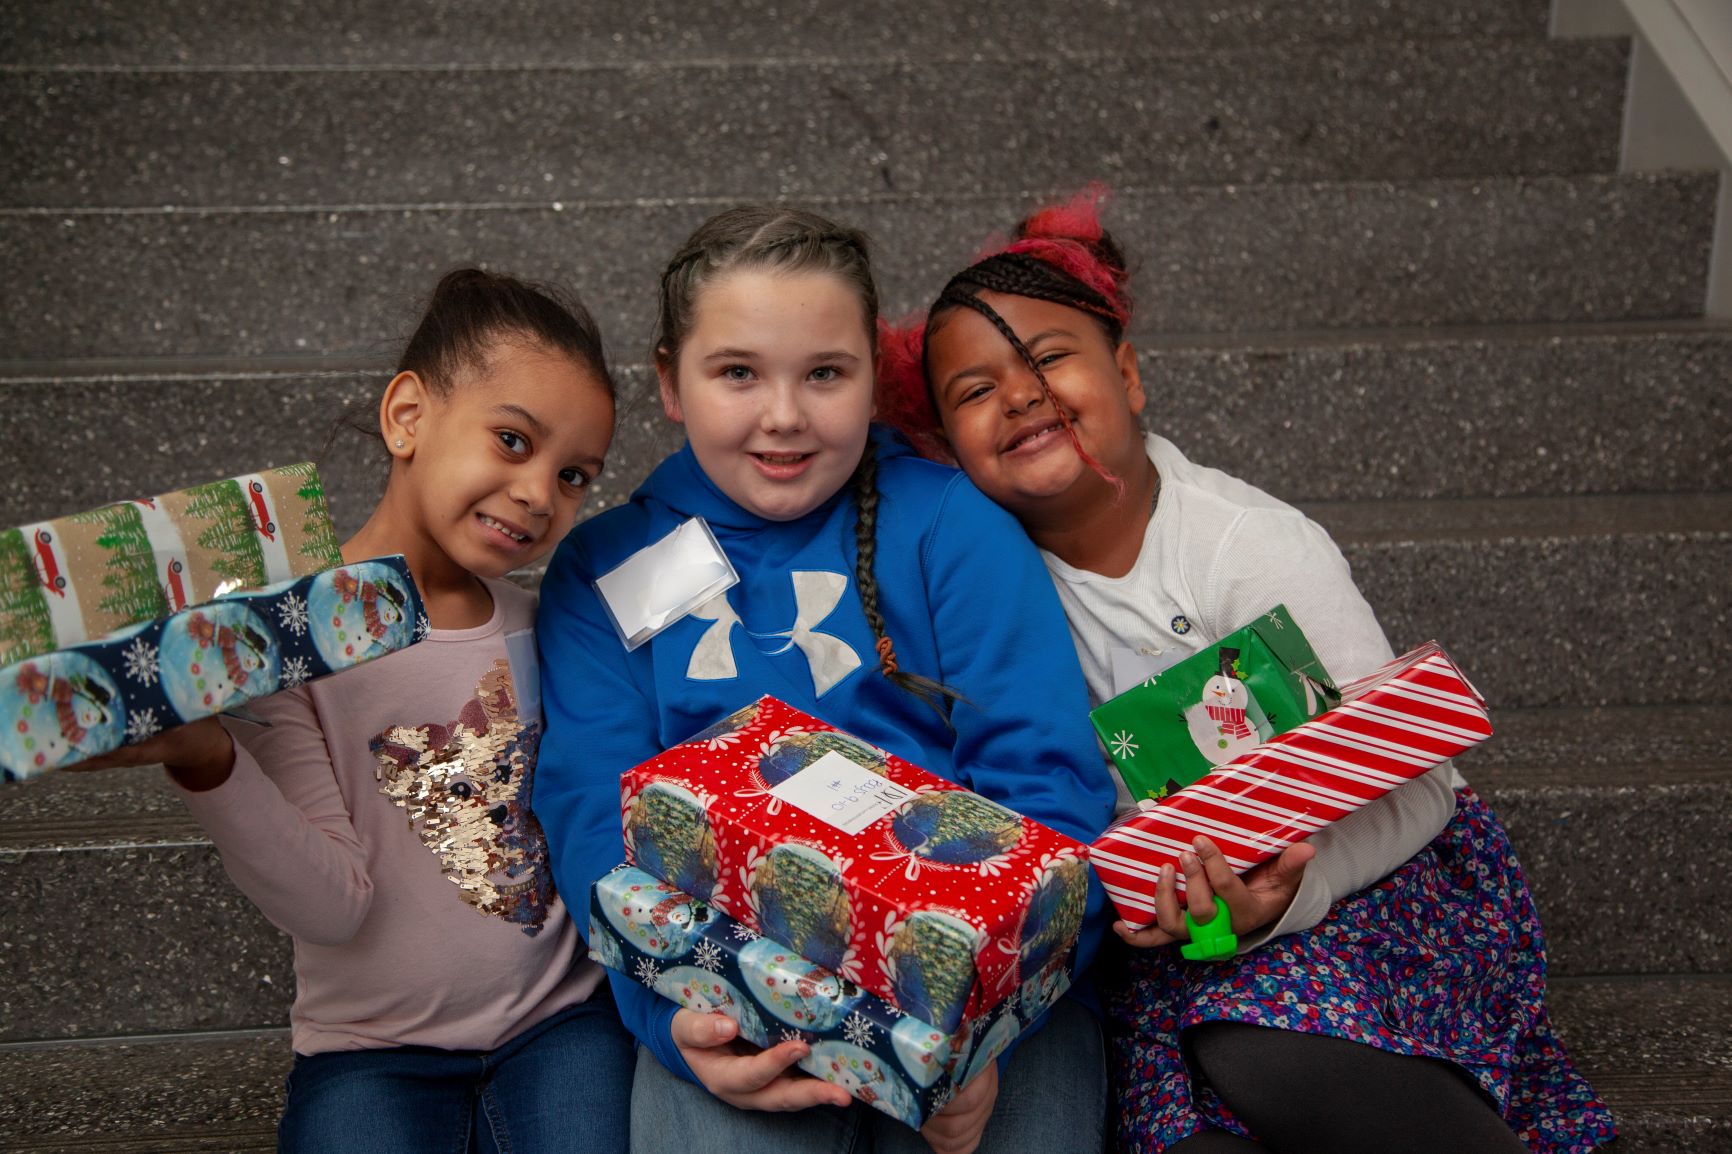 Three children holding brightly wrapped gifts.